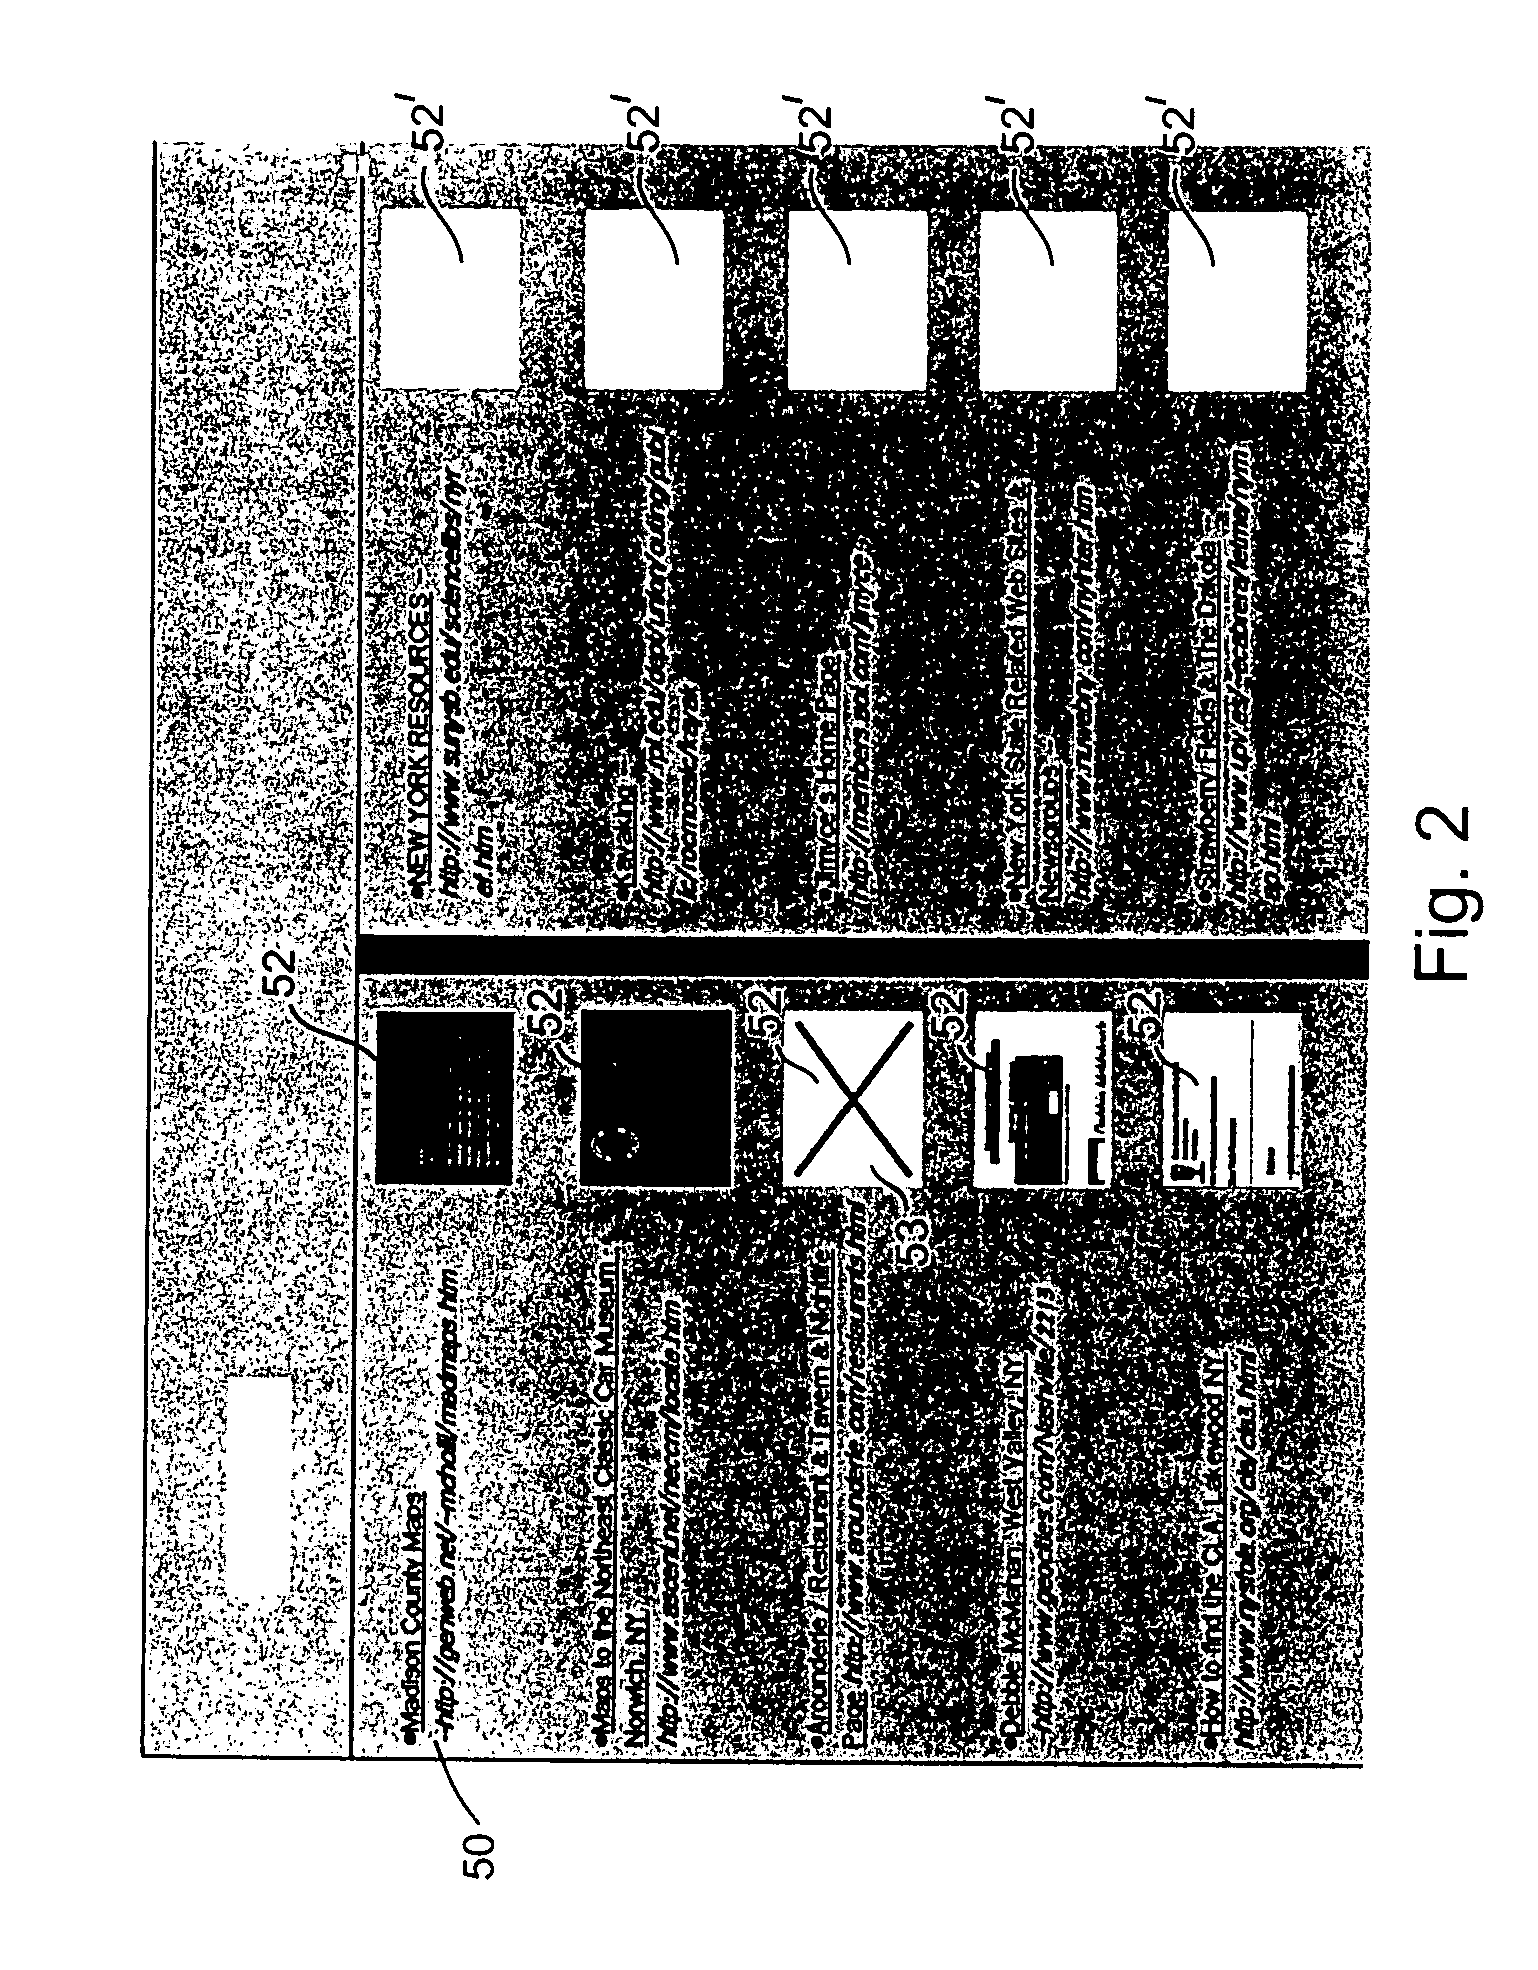 Systems and methods for generating and providing previews of electronic files such as Web files